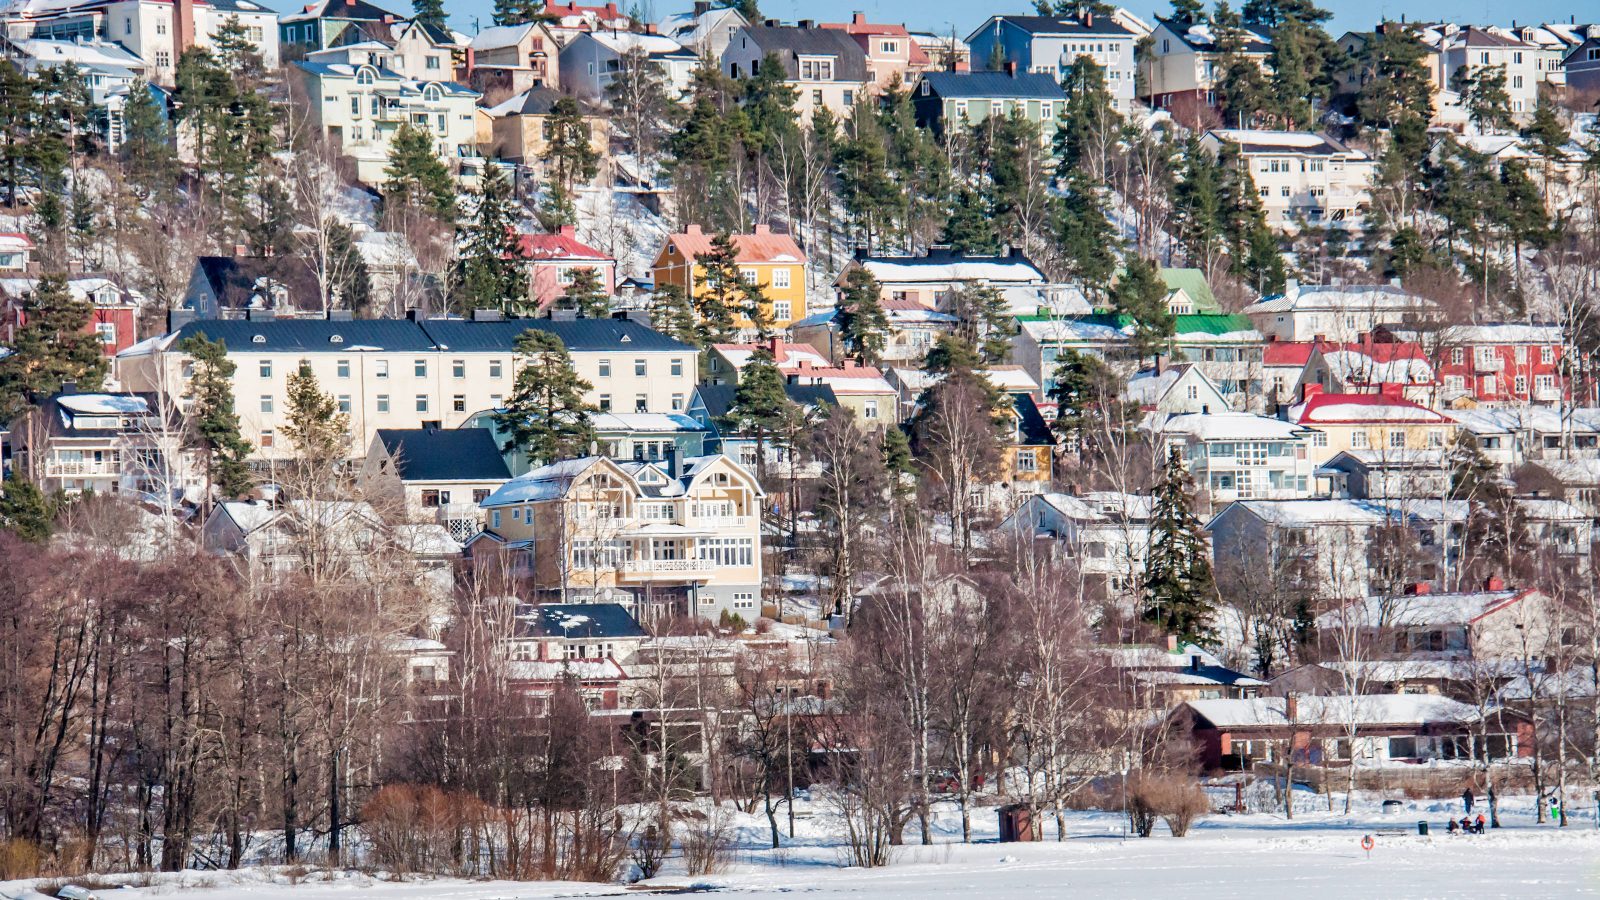 Wintery view of houses on a in Pispala, Finland.